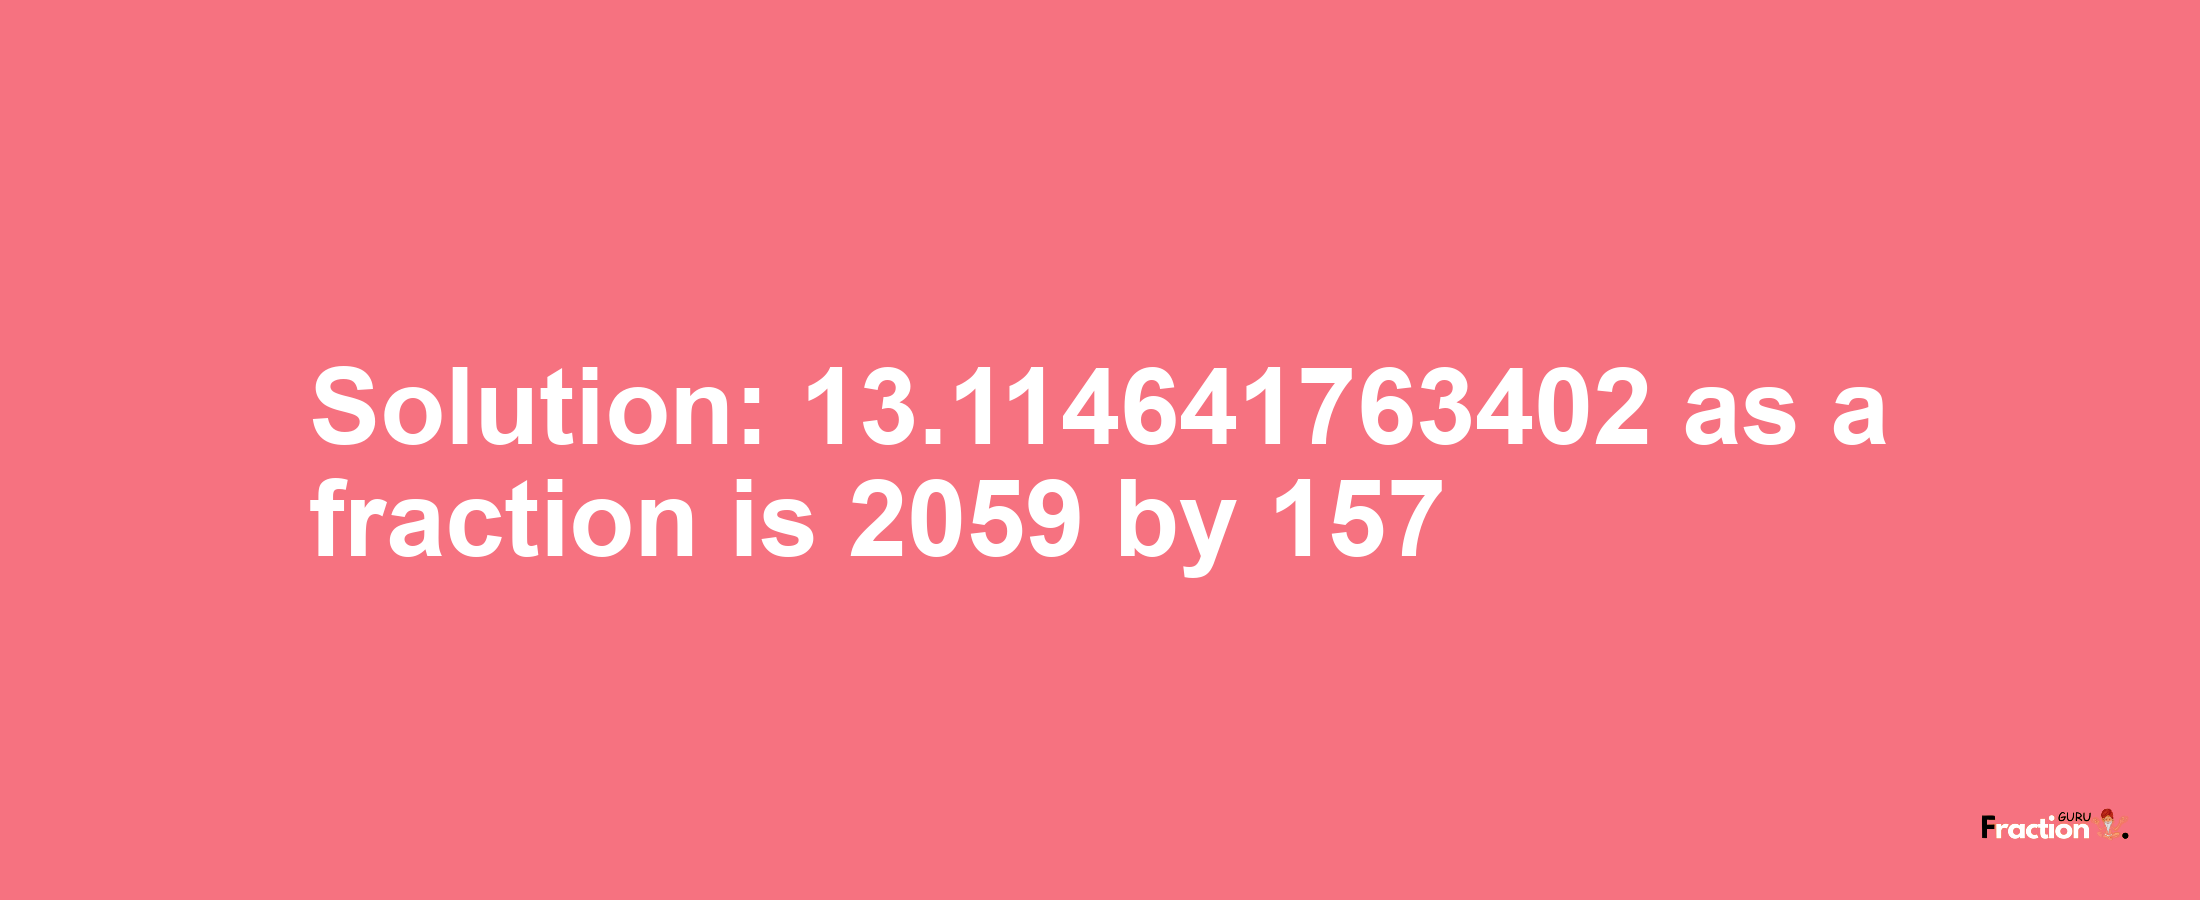 Solution:13.114641763402 as a fraction is 2059/157